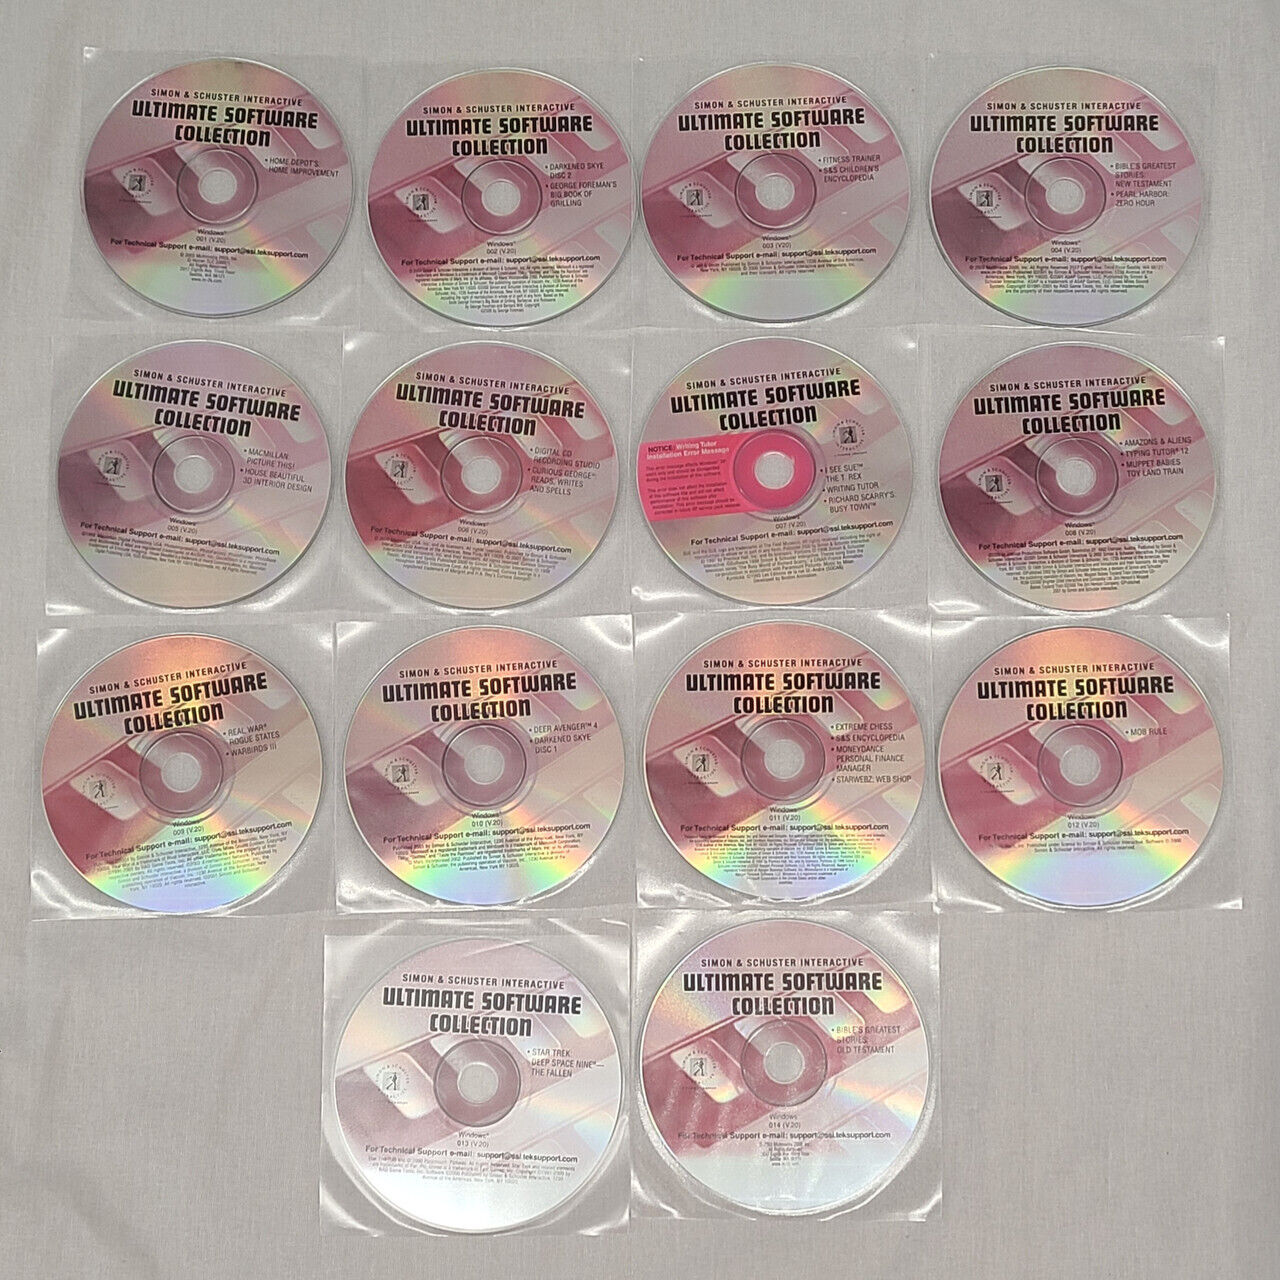 14 Simon & Schuster Interactive Ultimate Software Collection Discs